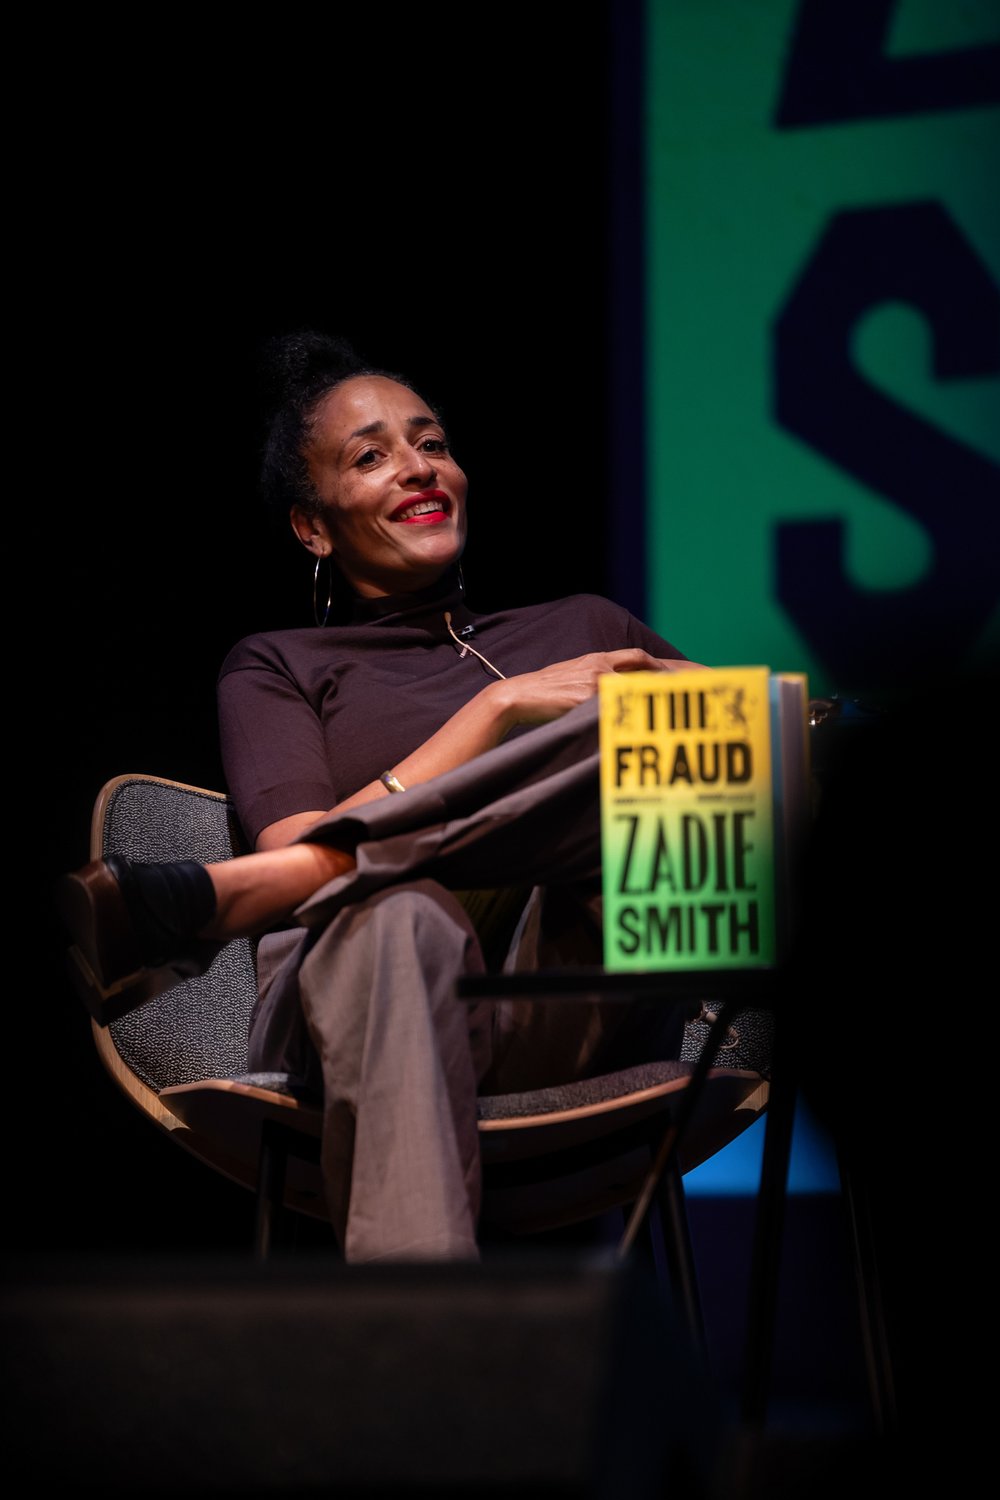 Author Zadie Smith promoting her novel The Fraud